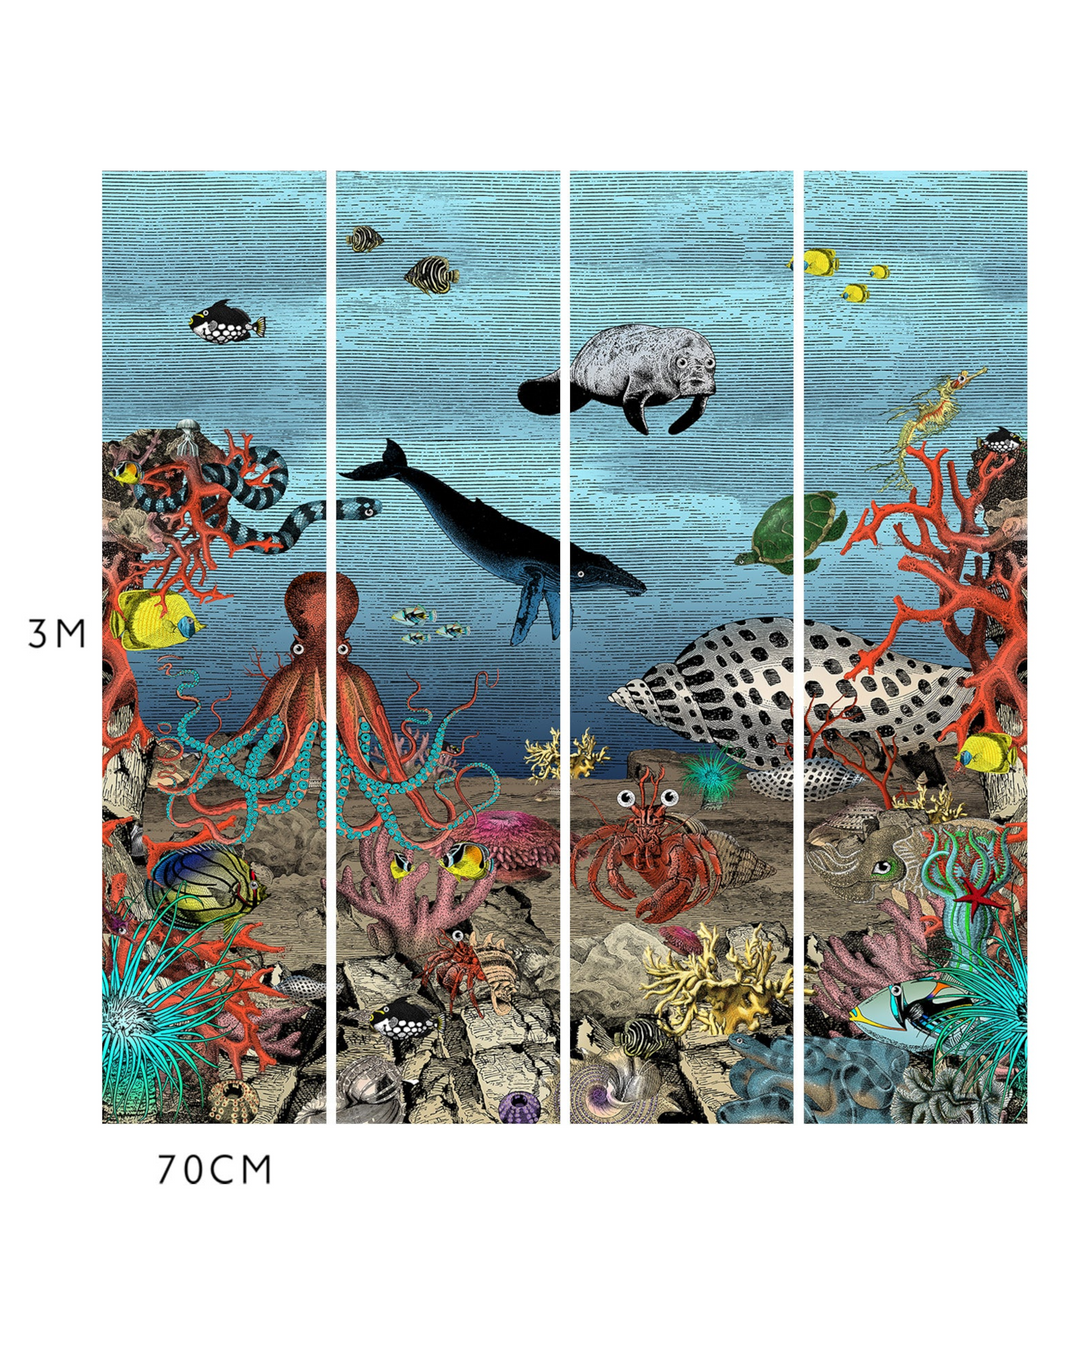 The Great Barrier Reef Wall Mural